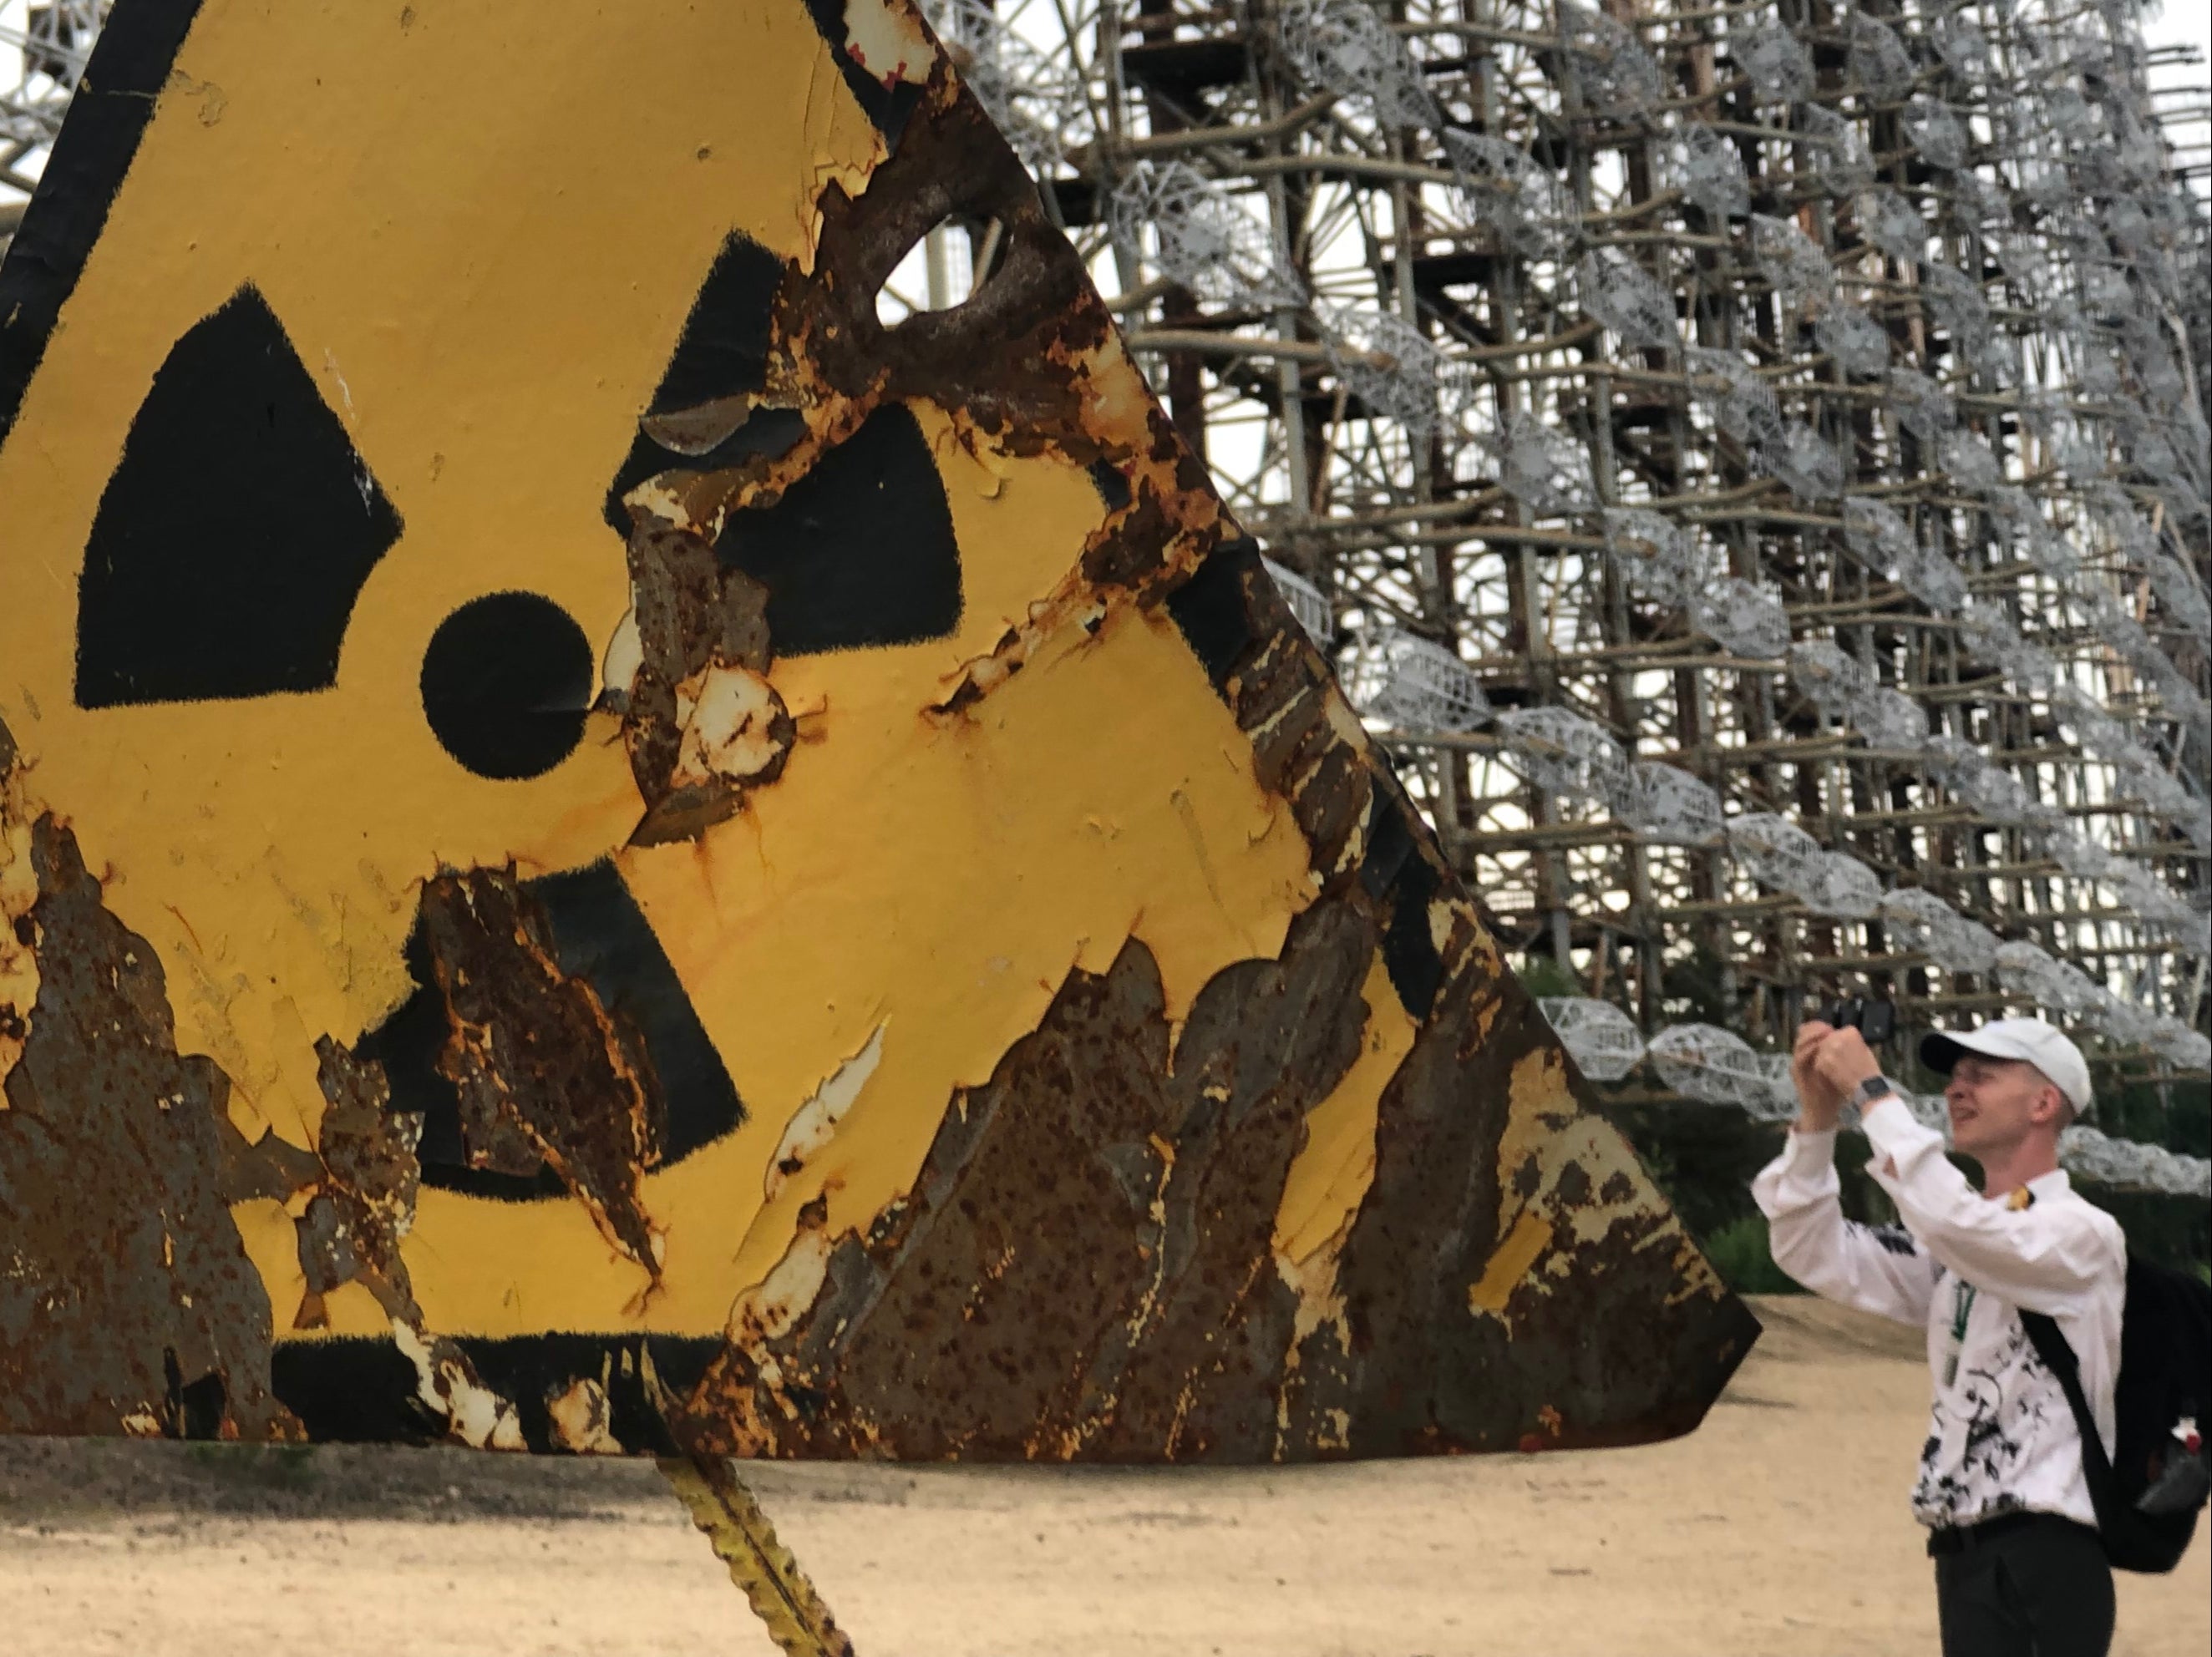 Exclusion zone: a tourist at the radar array close to the Chernobyl nuclear reactor, which will be off limits initially